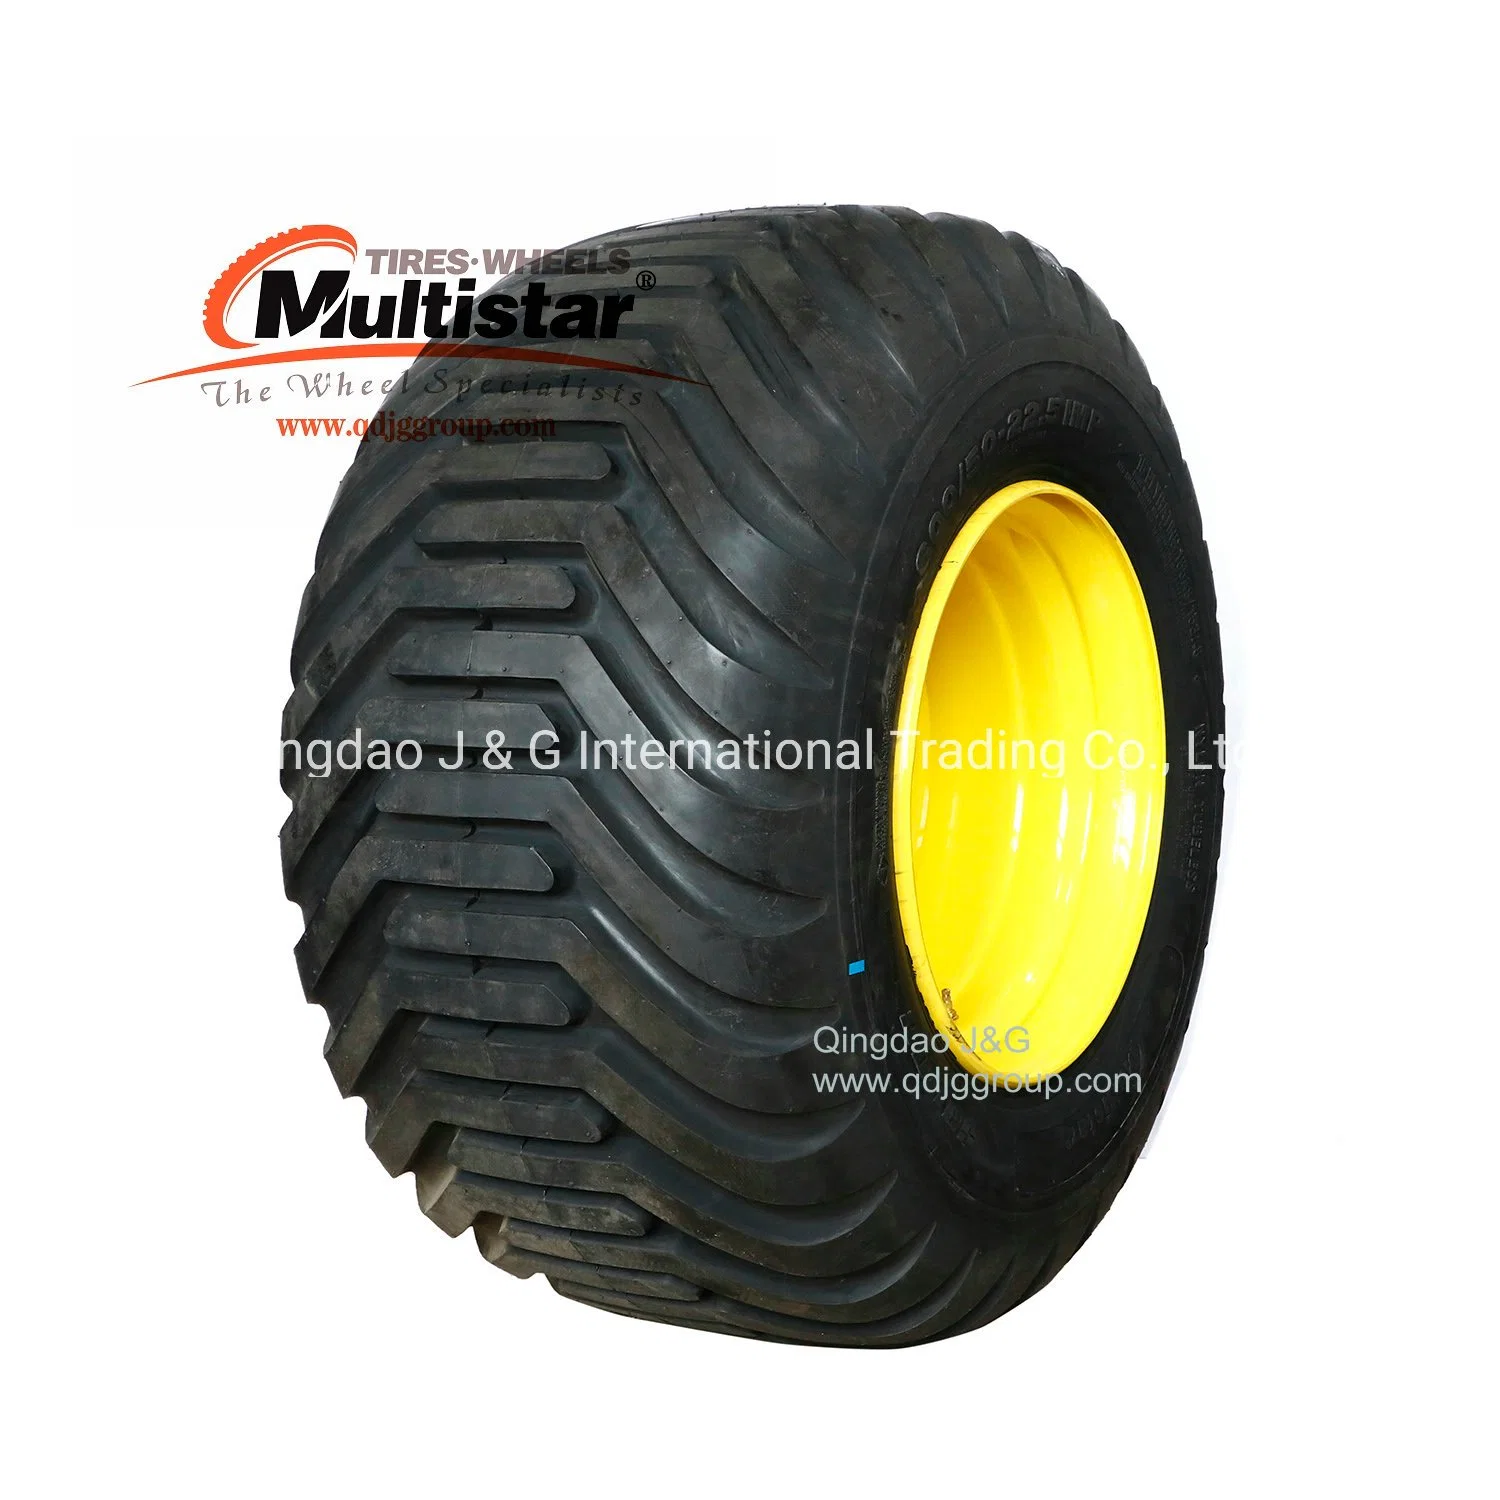 Agriculture Implement Tyre Flotation Tires and Complete Wheel Rims Agricultural Tyre with Rim 550/60-22.5, 550/45-22.5, 500/60-22.5, 500/45-22.5, 600/50-22.5